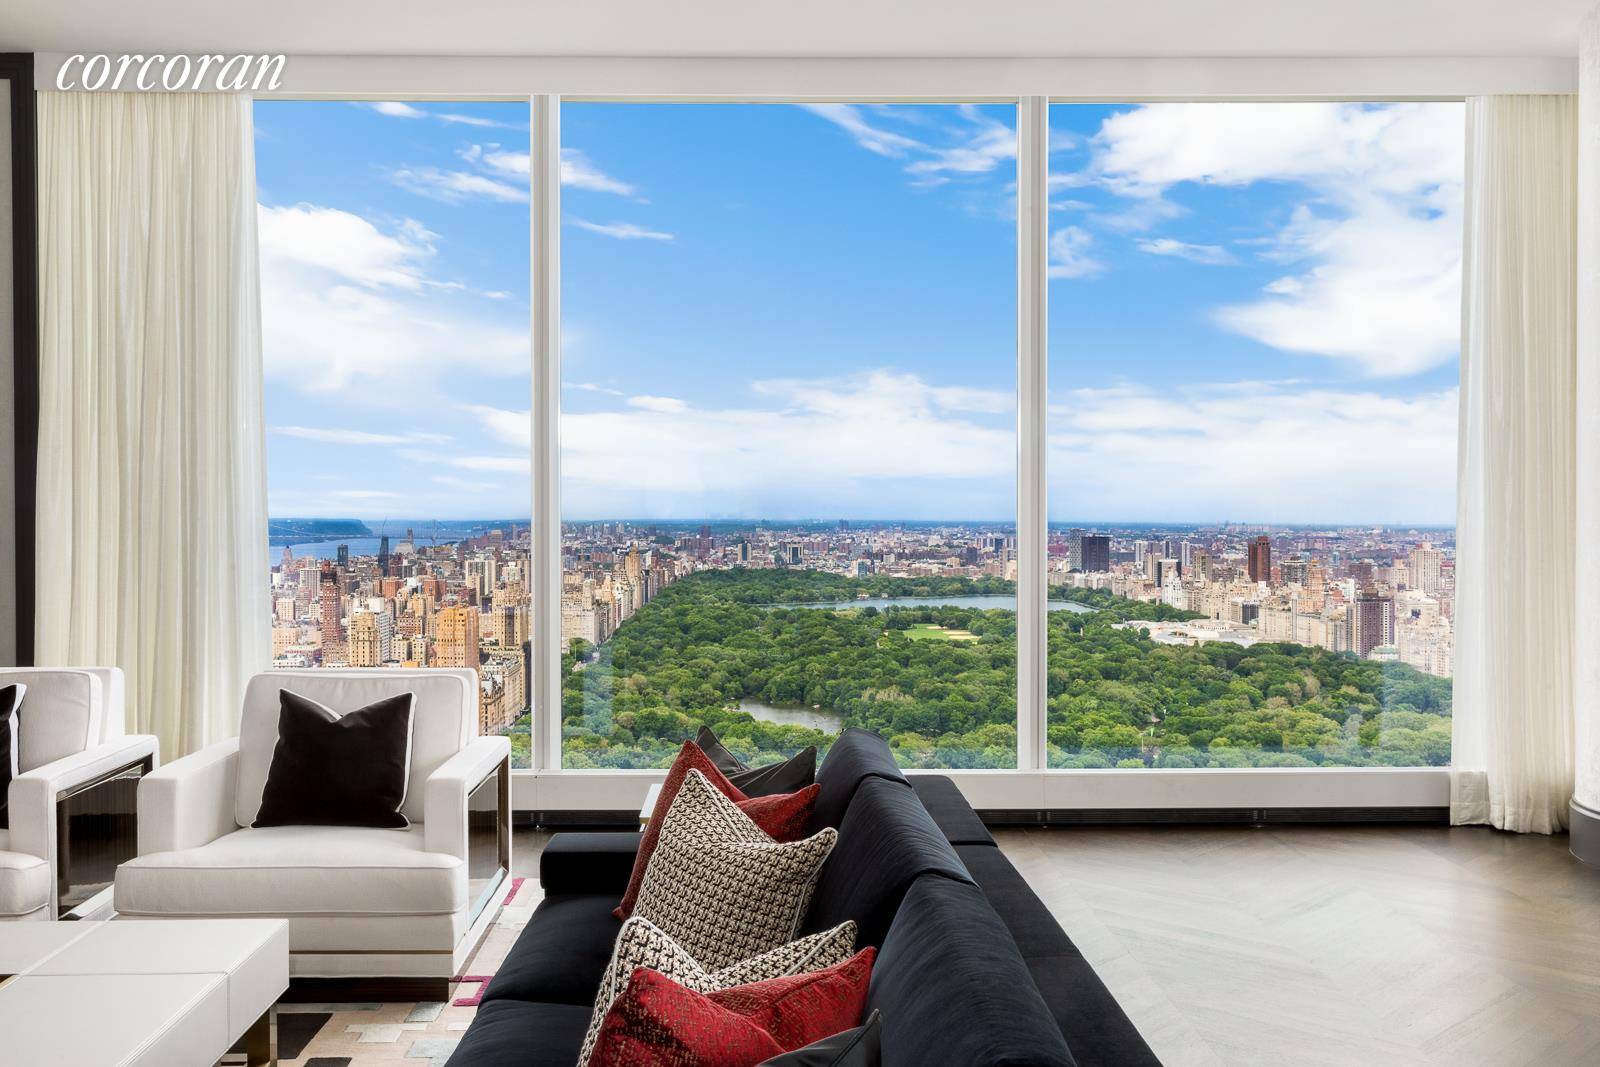 This three bedroom, three and one half bathroom residence at Central Park Tower offers gracious living enhanced by quintessential Central Park views from an elevation of 546 feet.